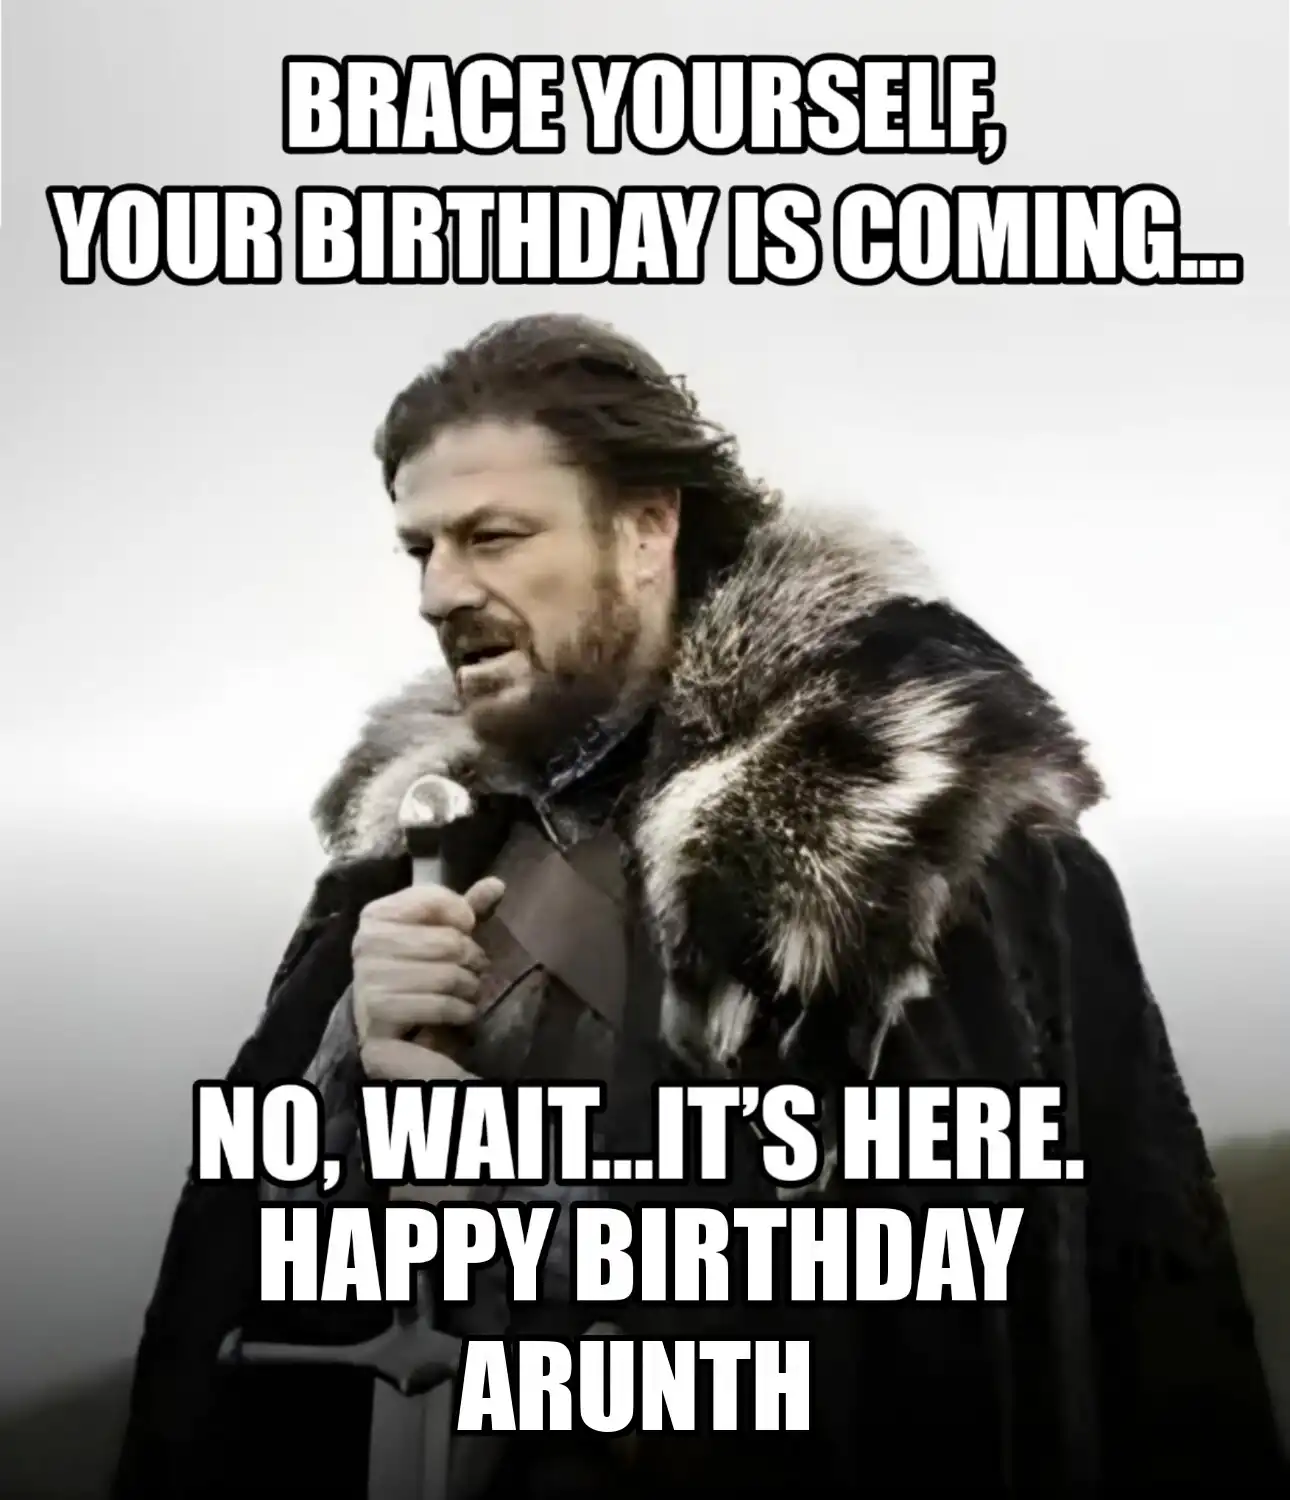 Happy Birthday Arunth Brace Yourself Your Birthday Is Coming Meme